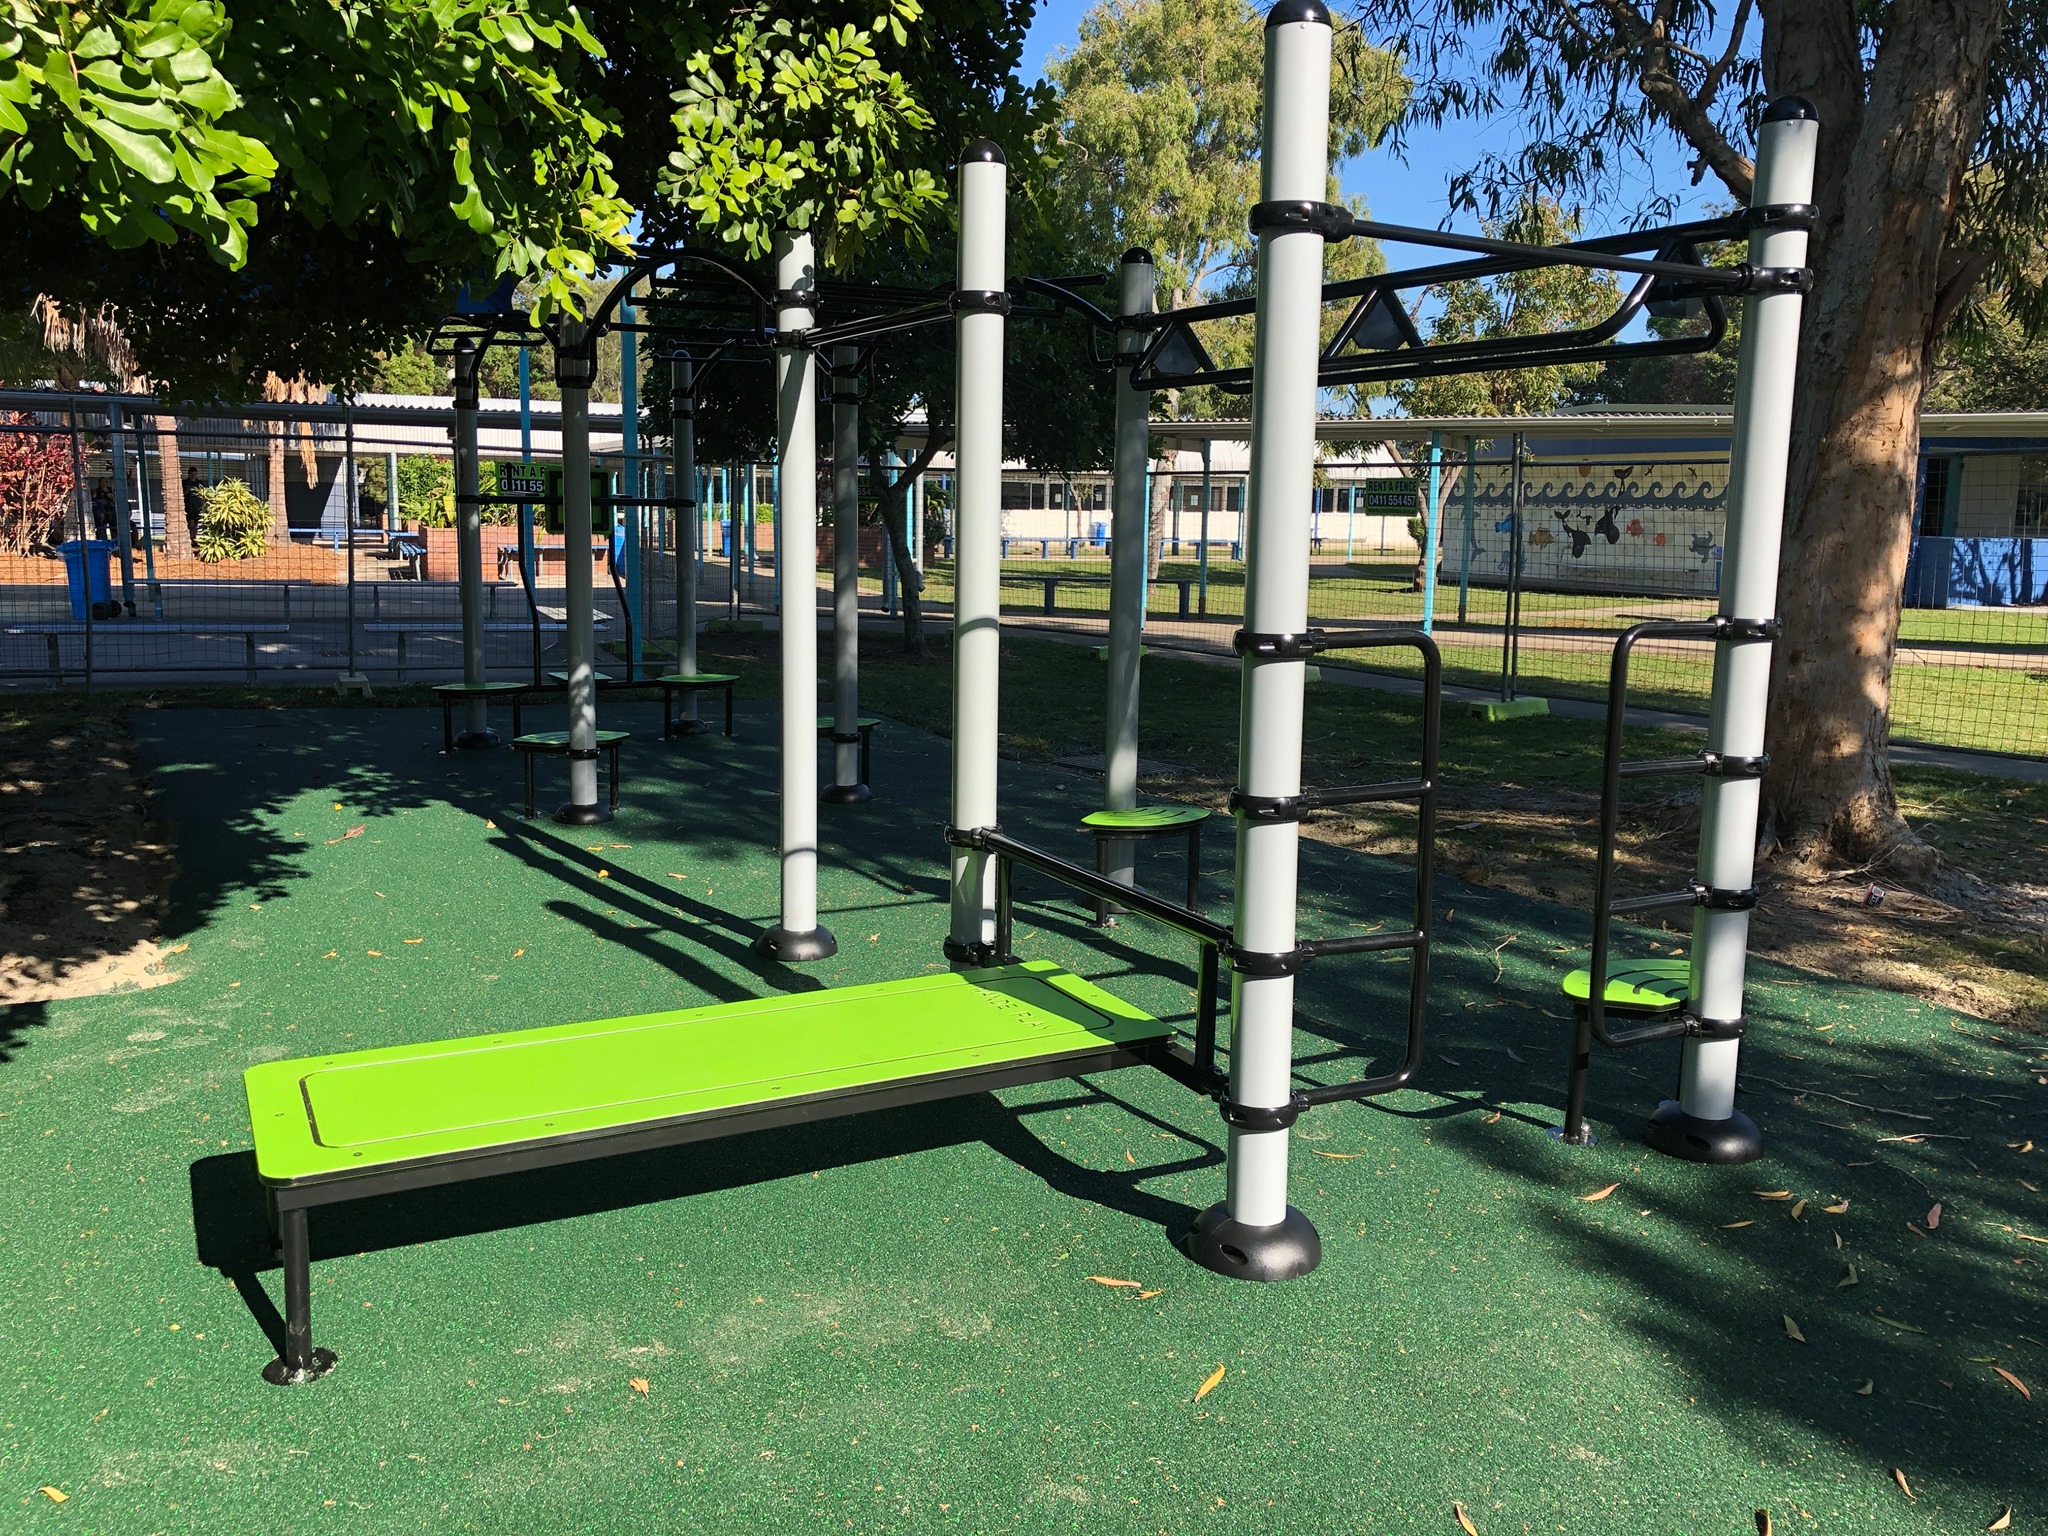 What are the precautions when installing outdoor fitness equipment?